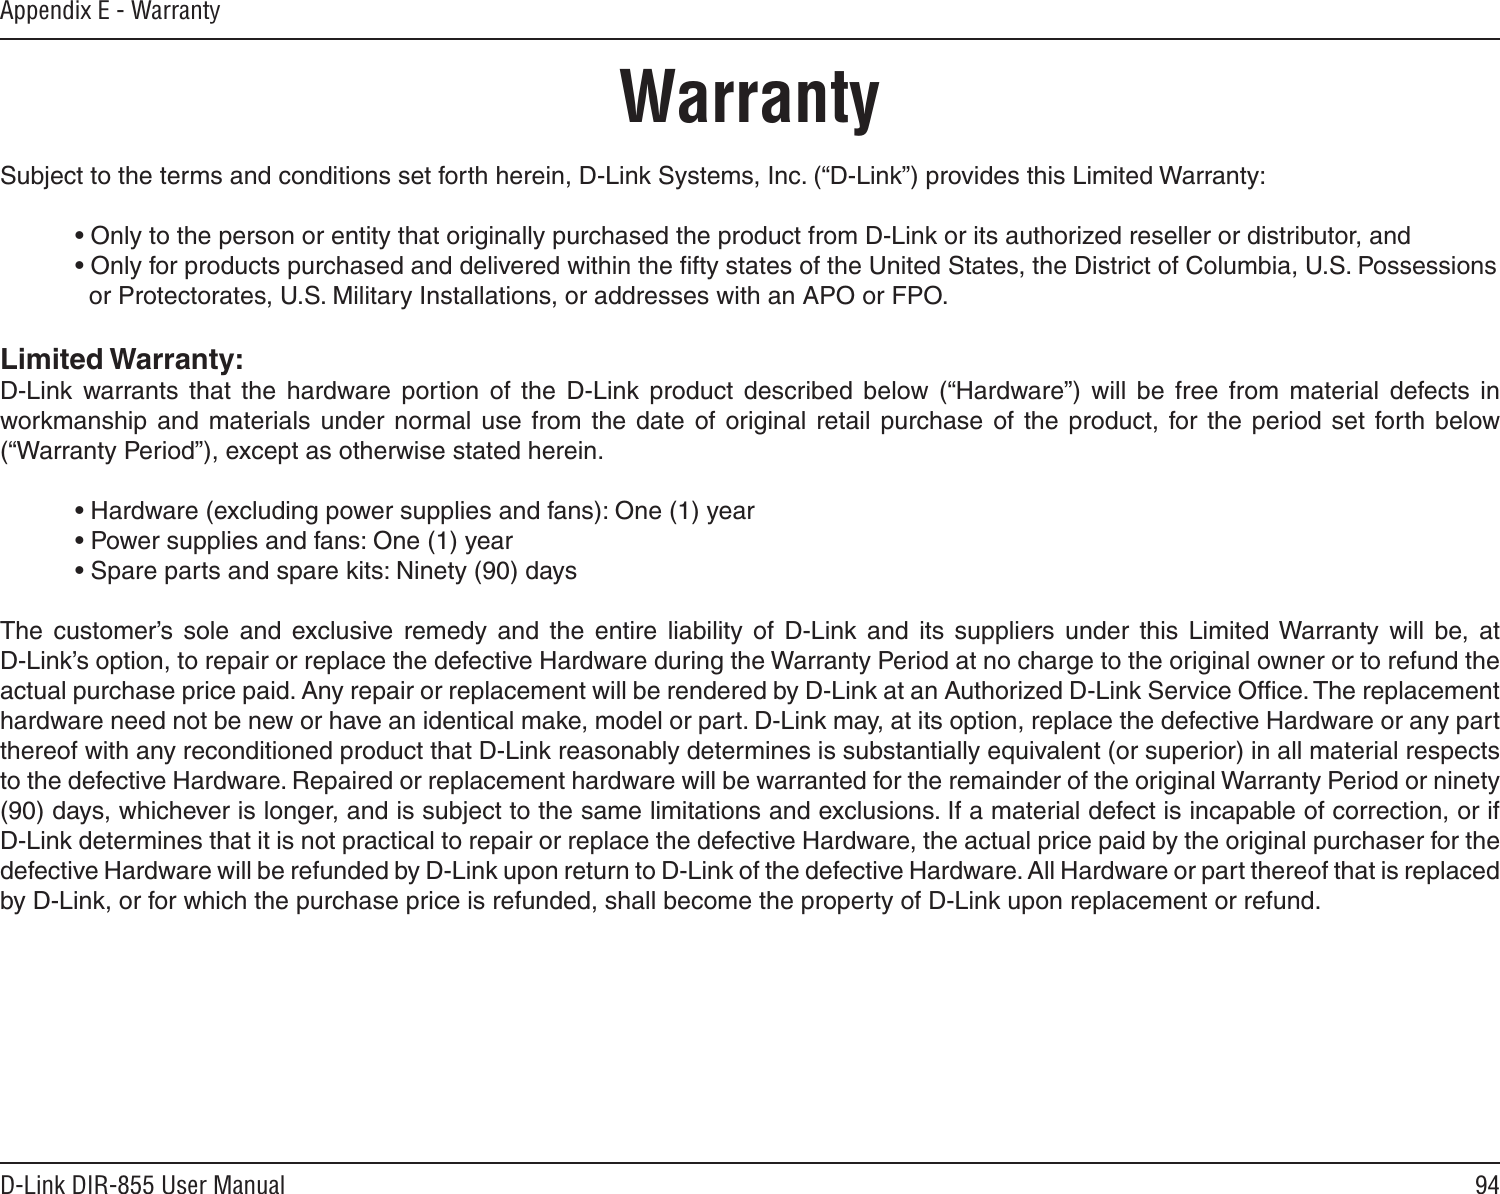 94D-Link DIR-855 User ManualAppendix E - WarrantyWarrantySubject to the terms and conditions set forth herein, D-Link Systems, Inc. (“D-Link”) provides this Limited Warranty:  • Only to the person or entity that originally purchased the product from D-Link or its authorized reseller or distributor, and  • Only for products purchased and delivered within the ﬁfty states of the United States, the District of Columbia, U.S. Possessions      or Protectorates, U.S. Military Installations, or addresses with an APO or FPO.Limited Warranty:D-Link  warrants  that  the  hardware  portion  of  the  D-Link  product  described  below  (“Hardware”)  will  be  free  from  material  defects  in workmanship  and materials under normal  use from the  date of original retail  purchase  of the  product,  for  the  period  set forth  below (“Warranty Period”), except as otherwise stated herein.  • Hardware (excluding power supplies and fans): One (1) year  • Power supplies and fans: One (1) year  • Spare parts and spare kits: Ninety (90) daysThe  customer’s  sole  and  exclusive  remedy  and  the  entire  liability  of  D-Link  and  its  suppliers  under  this  Limited Warranty  will  be,  at  D-Link’s option, to repair or replace the defective Hardware during the Warranty Period at no charge to the original owner or to refund the actual purchase price paid. Any repair or replacement will be rendered by D-Link at an Authorized D-Link Service Ofﬁce. The replacement hardware need not be new or have an identical make, model or part. D-Link may, at its option, replace the defective Hardware or any part thereof with any reconditioned product that D-Link reasonably determines is substantially equivalent (or superior) in all material respects to the defective Hardware. Repaired or replacement hardware will be warranted for the remainder of the original Warranty Period or ninety (90) days, whichever is longer, and is subject to the same limitations and exclusions. If a material defect is incapable of correction, or if D-Link determines that it is not practical to repair or replace the defective Hardware, the actual price paid by the original purchaser for the defective Hardware will be refunded by D-Link upon return to D-Link of the defective Hardware. All Hardware or part thereof that is replaced by D-Link, or for which the purchase price is refunded, shall become the property of D-Link upon replacement or refund.